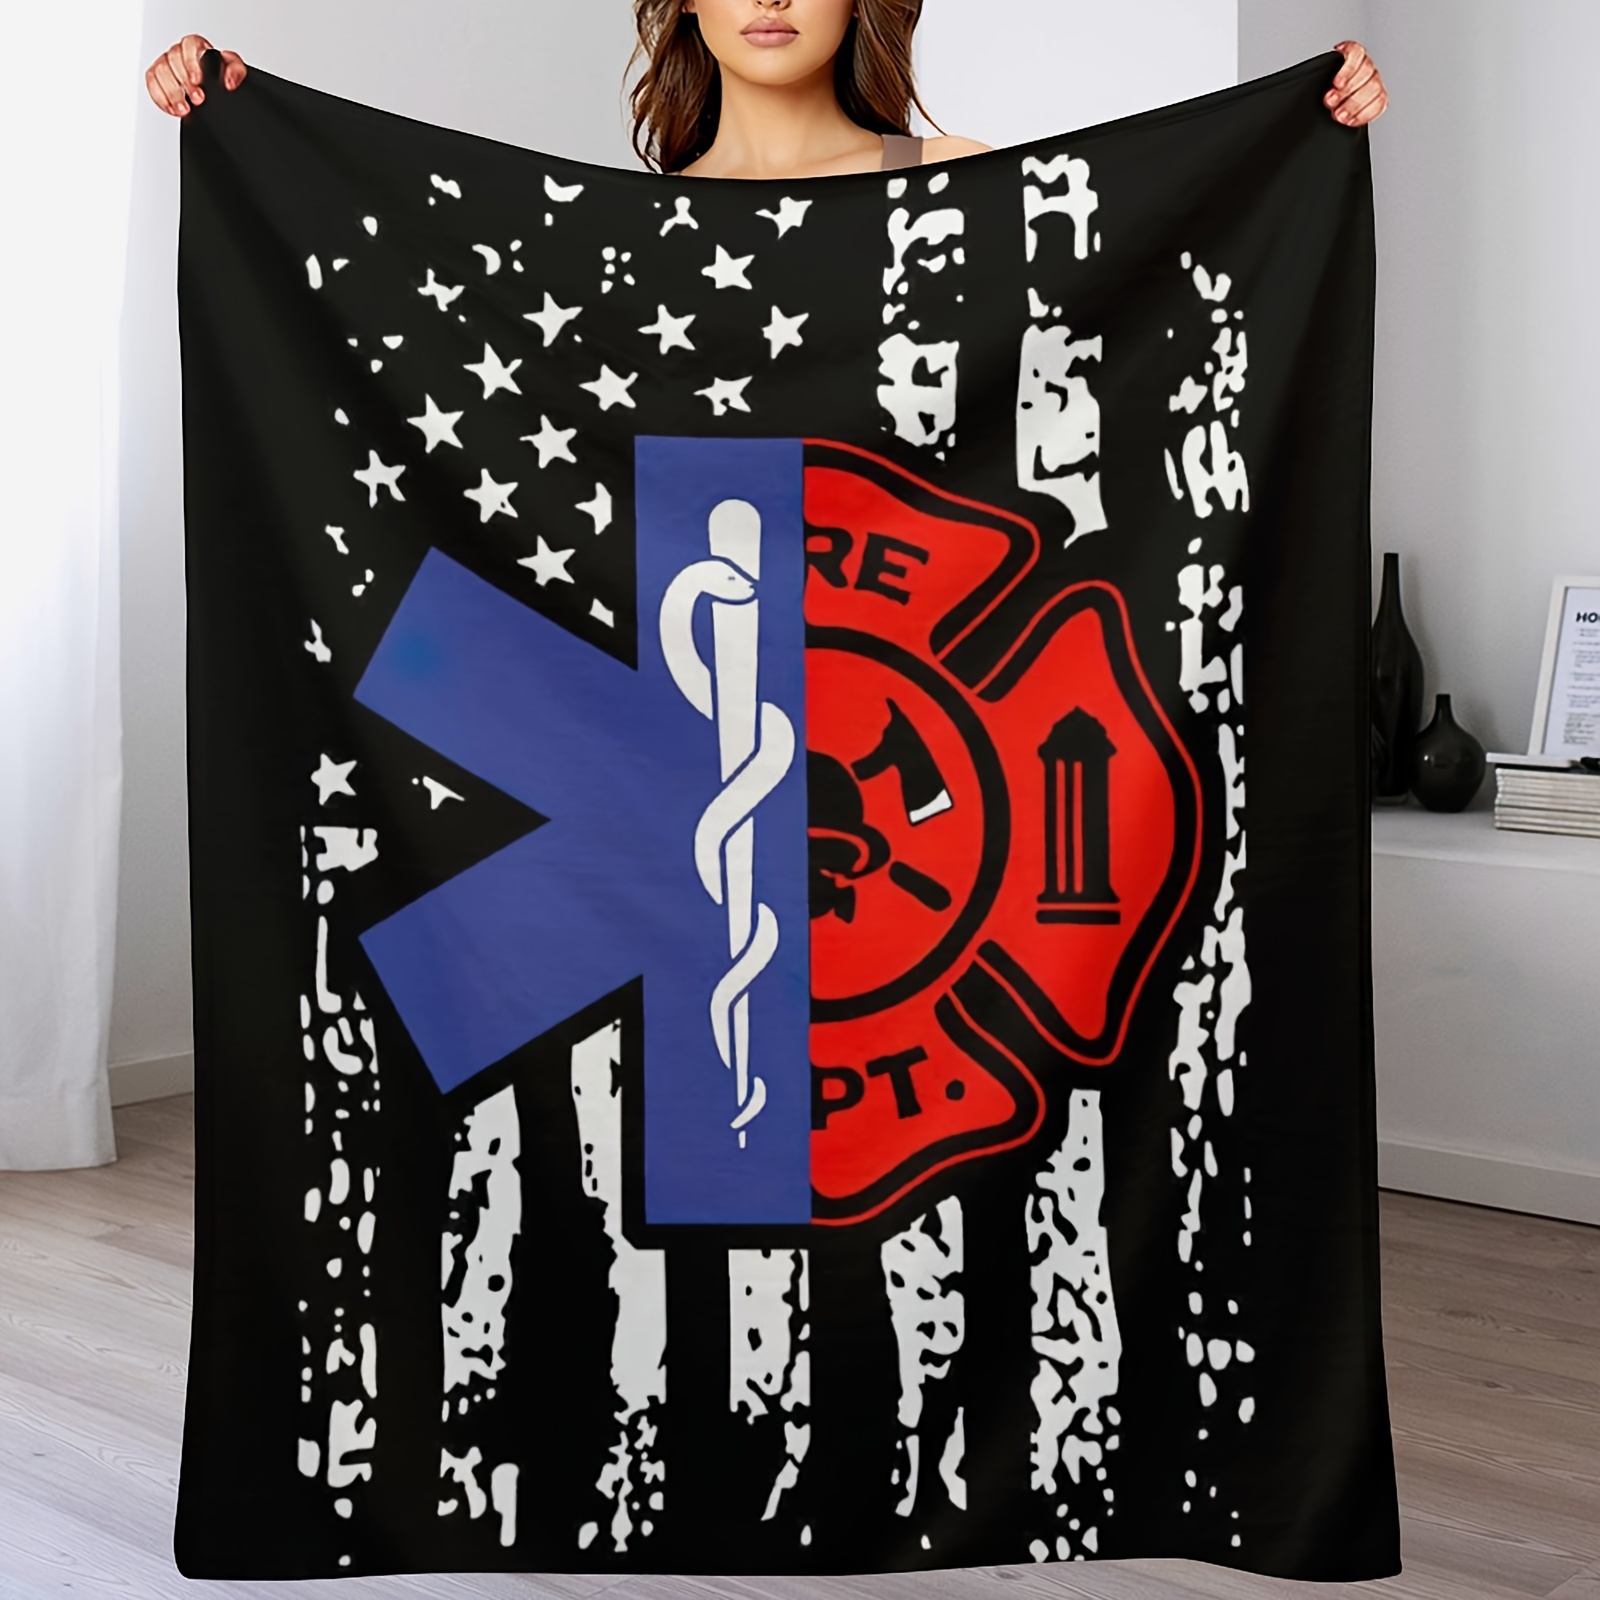 

Firefighter Throw Blankets Birthday Gift Idea For Men Dad Husband Son Friend - Practitioner Fireman Firewoman Blanket For First In Last Out Responder